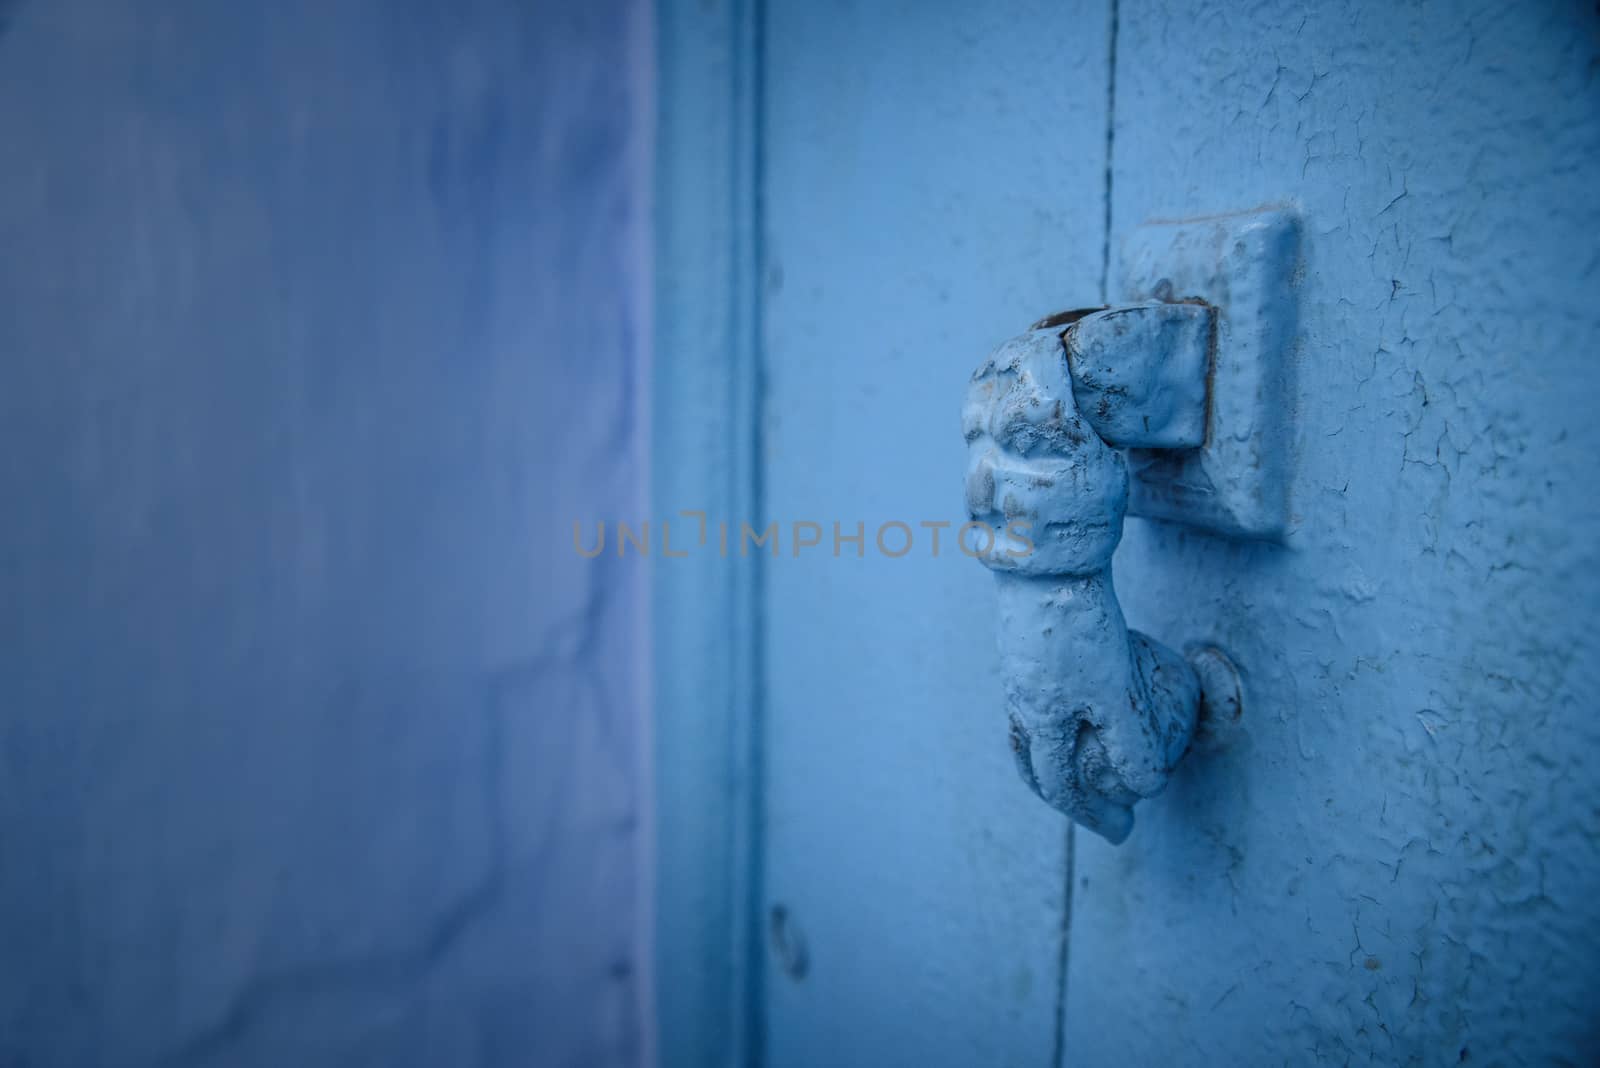 Knocker in Chefchaouen, the blue city in the Morocco is a popular travel destination